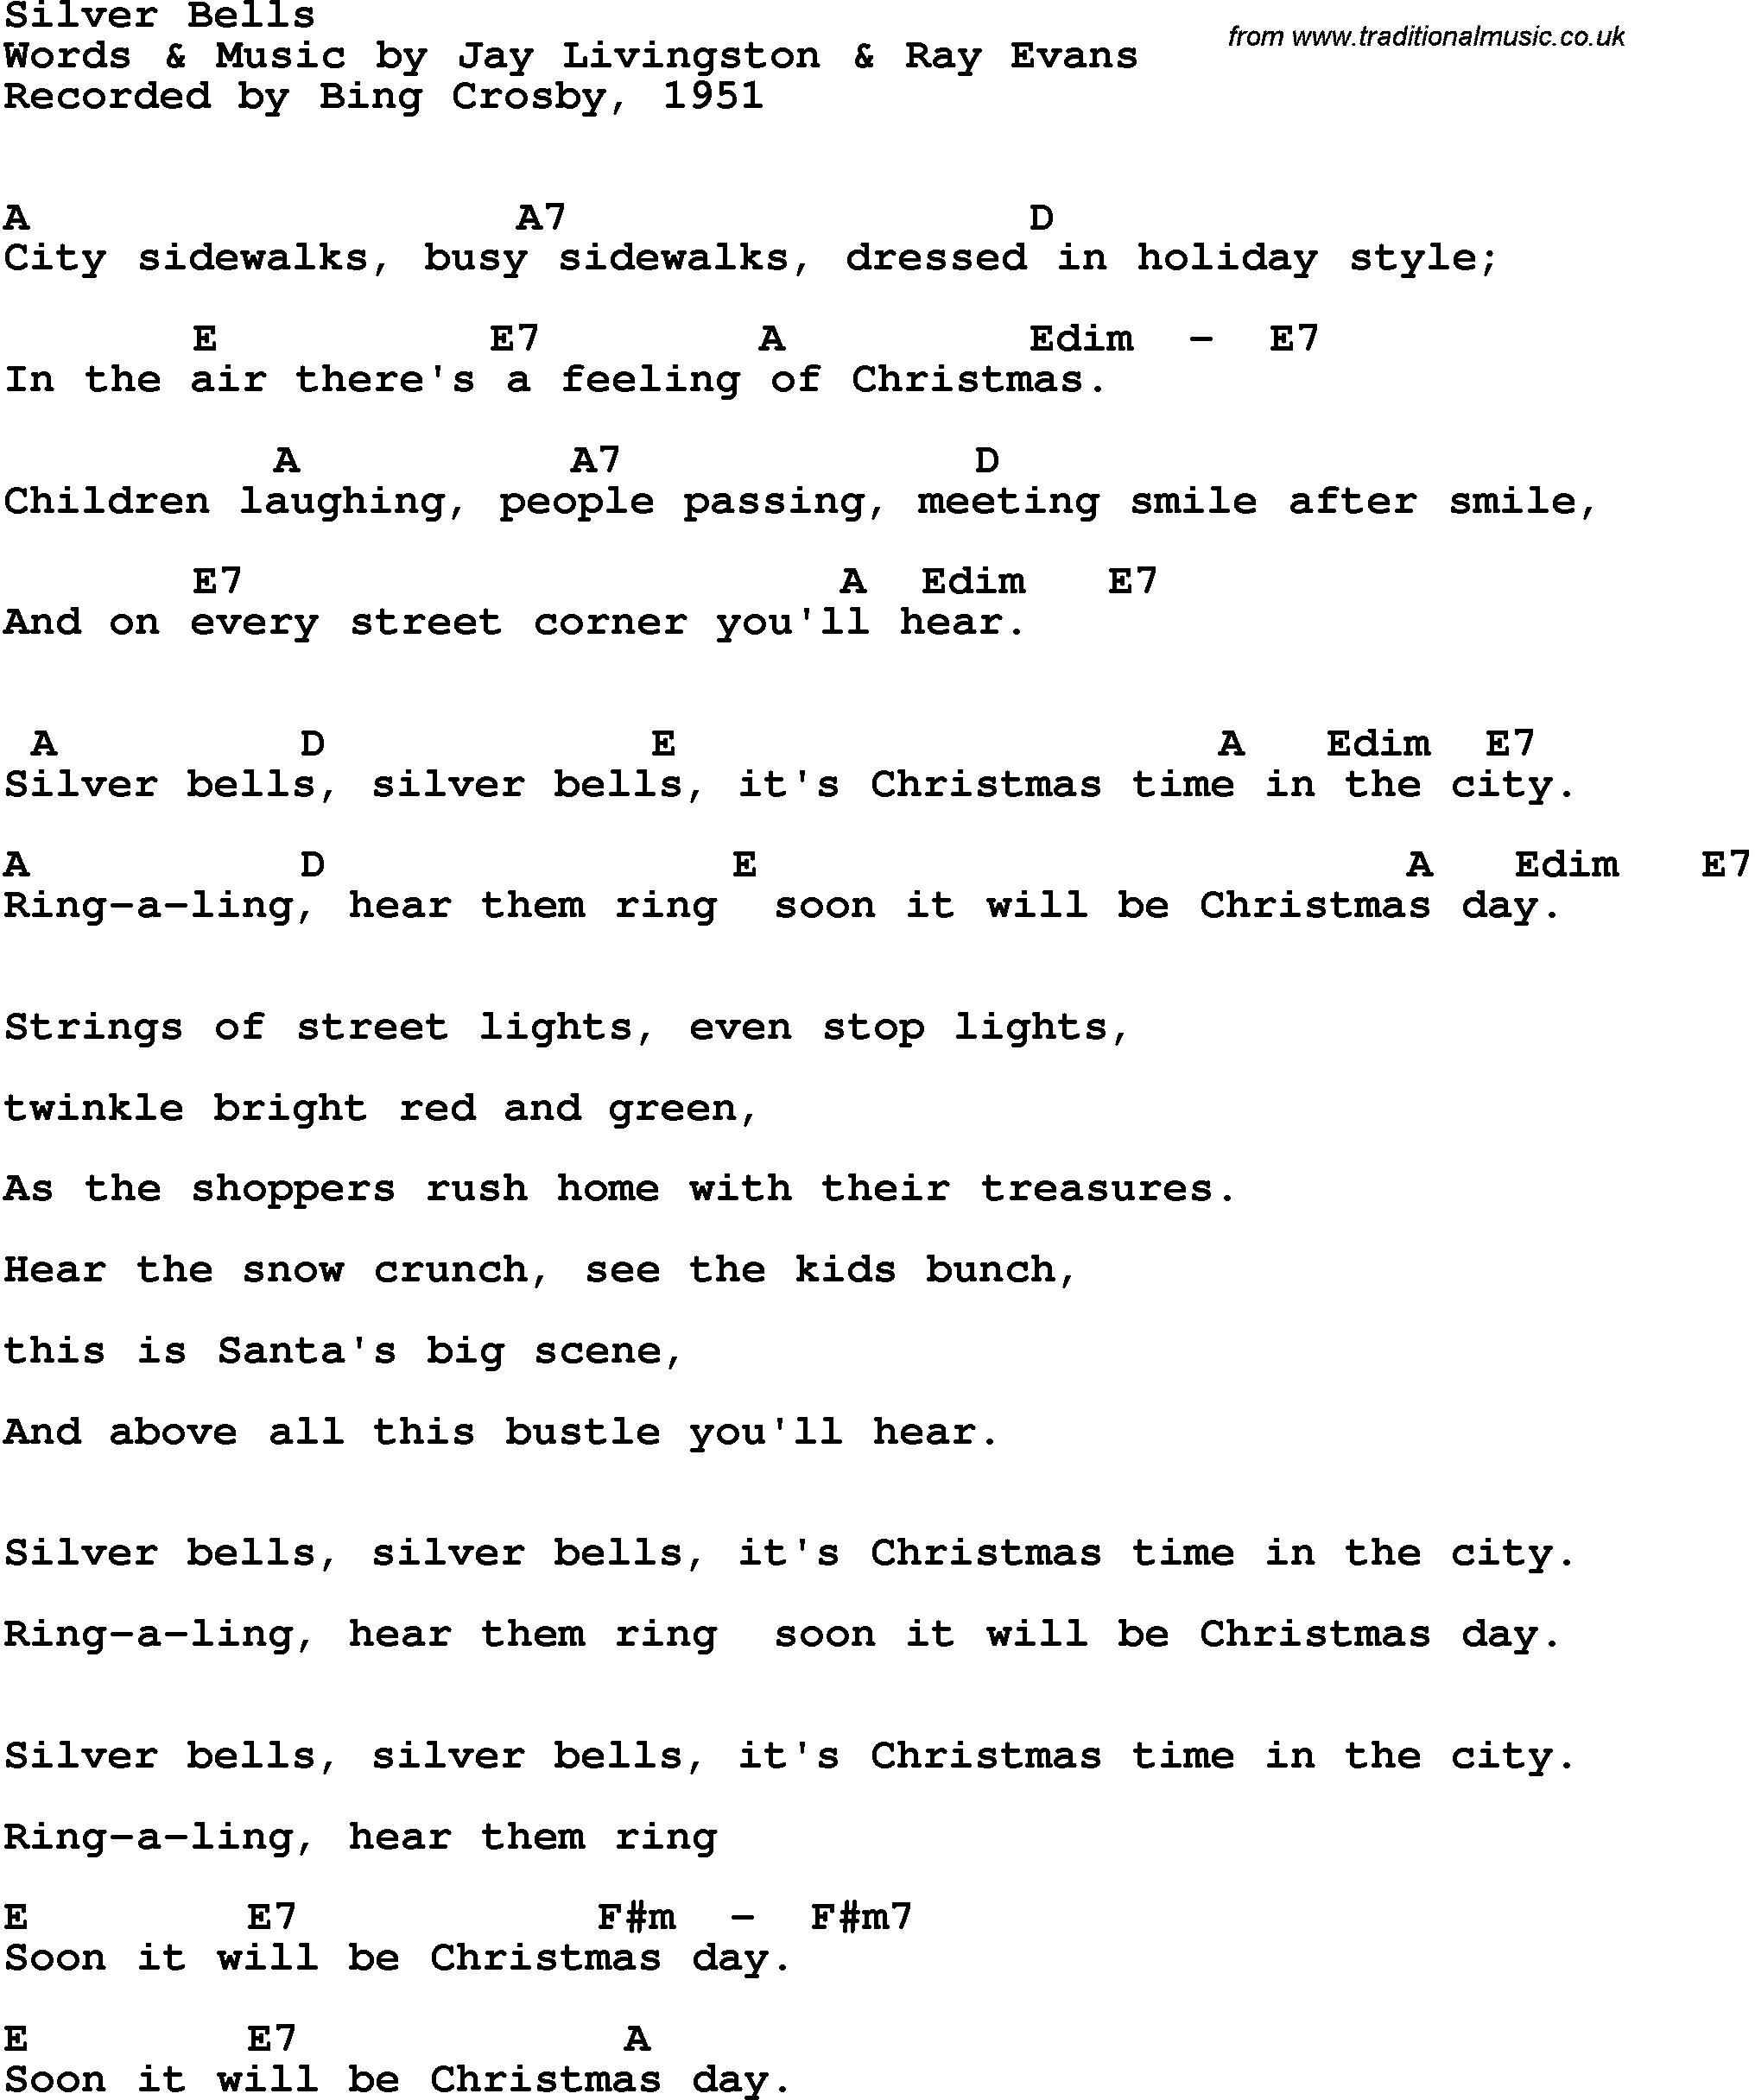 Song Lyrics with guitar chords for Silver Bells - Bing Crosby, 1951